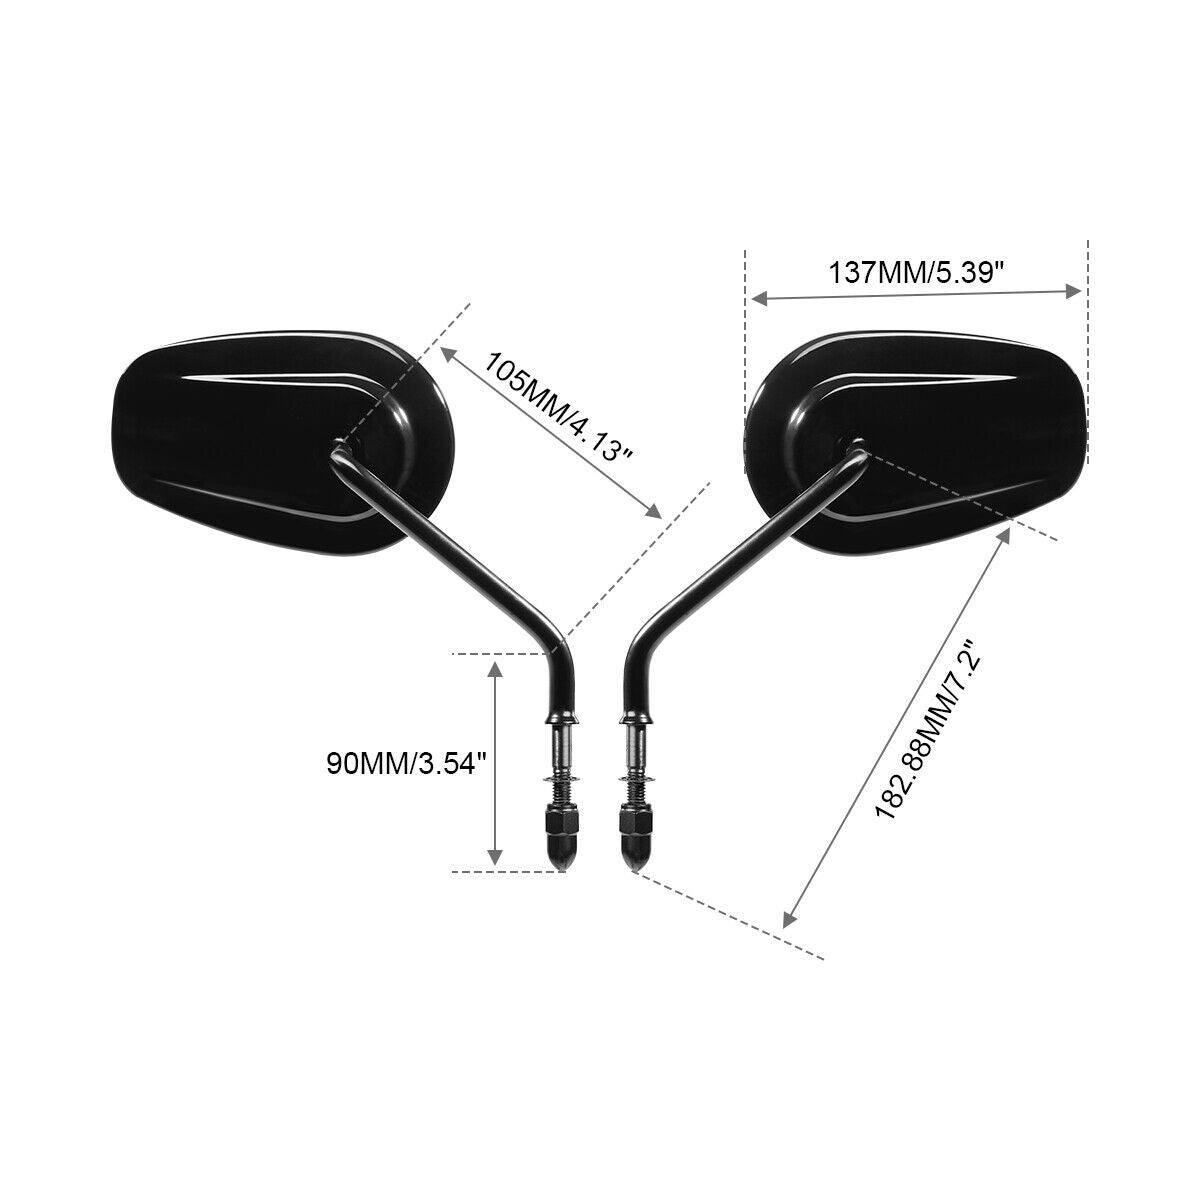 Black Rear View Side Mirrors Fit For Harley Road King Touring XL 883 SPORTSTER - Moto Life Products